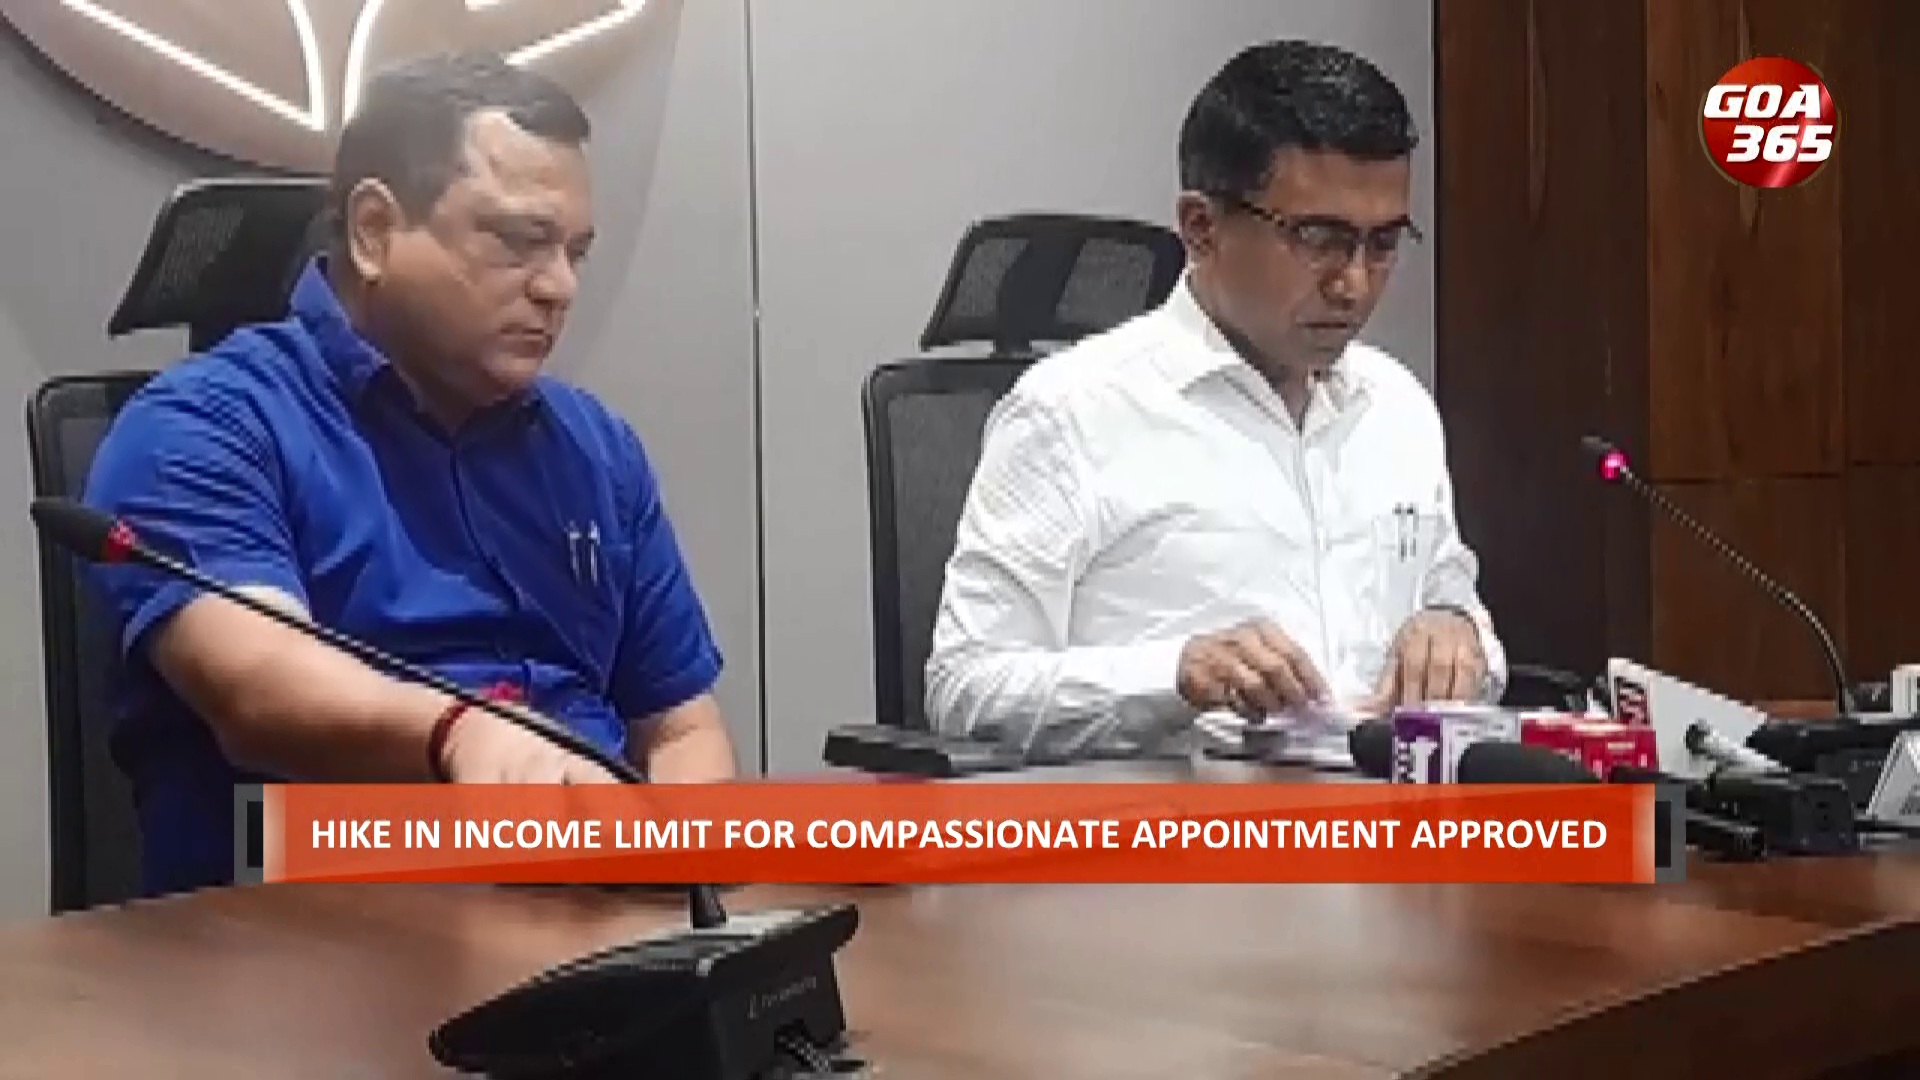 Cabinet: Hike in income limit for compassionate appointment to Rs 5 lakh approved || ENGLISH || GOA365